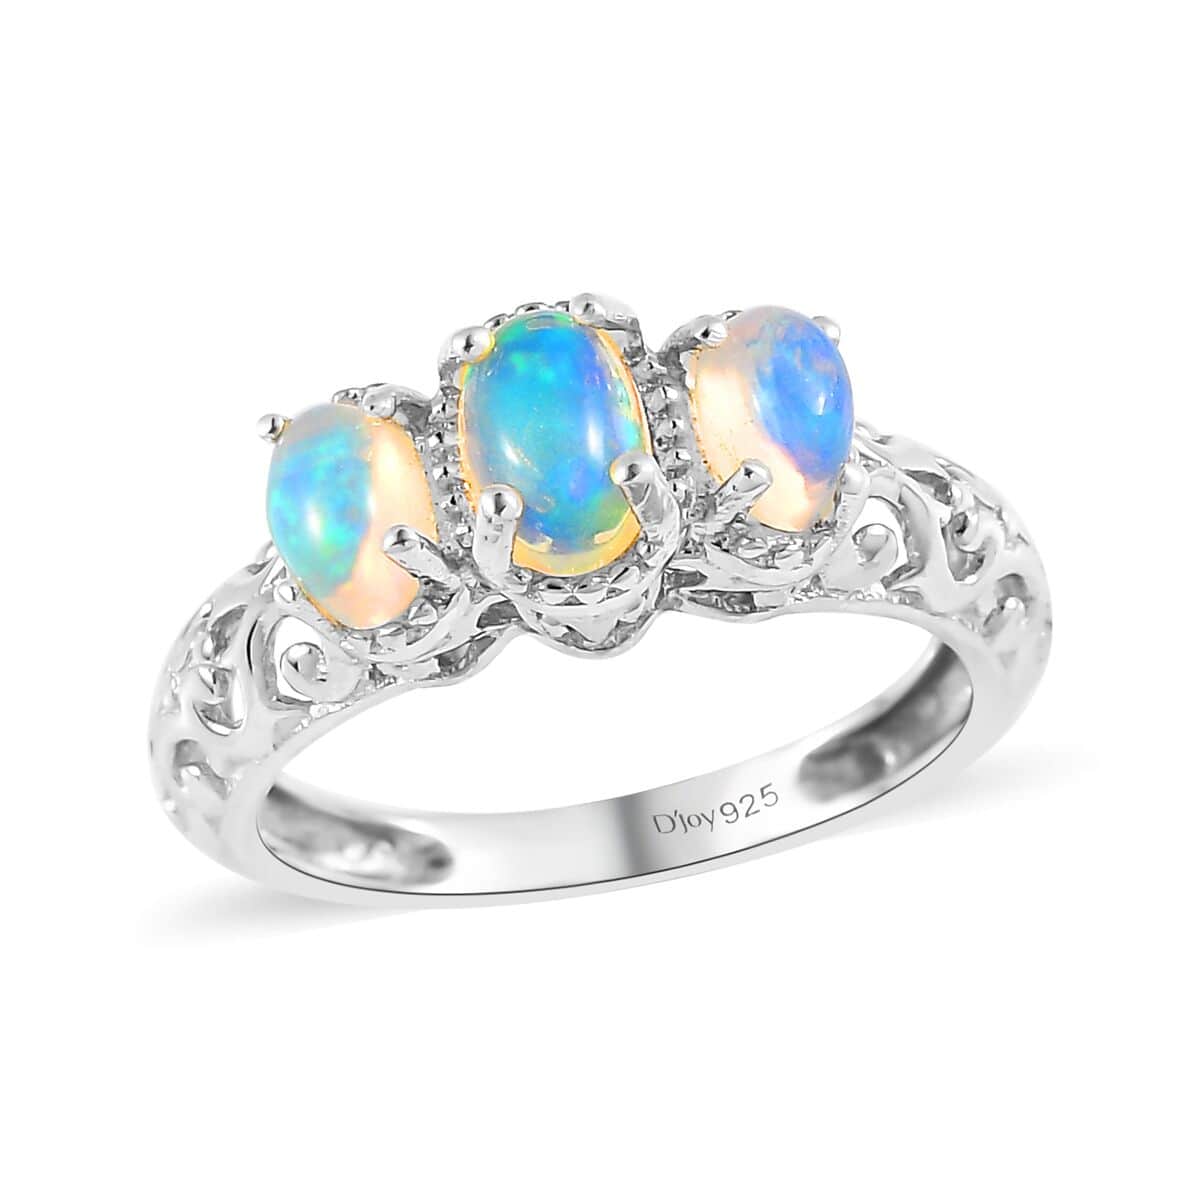 Opal Ring, 3 Stone Opal Ring, Trilogy Ring, Sterling Silver Ring,  Birthstone Jewelry, Ethiopian Welo Opal 3 Stone Ring 0.75 ctw (Size 10)